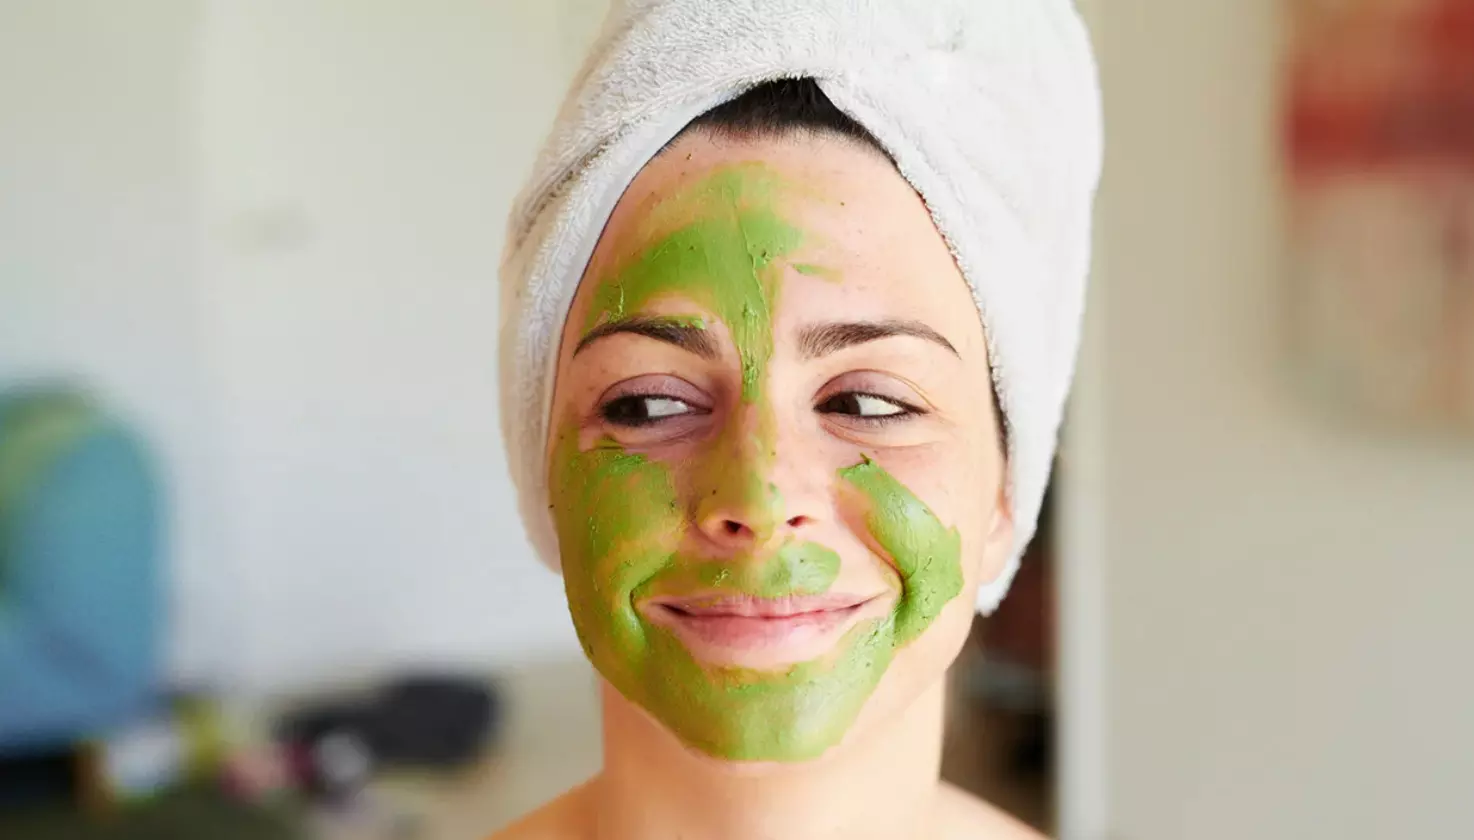 If pimples appear on your face every day then try applying basil like this, pimples will not appear again.